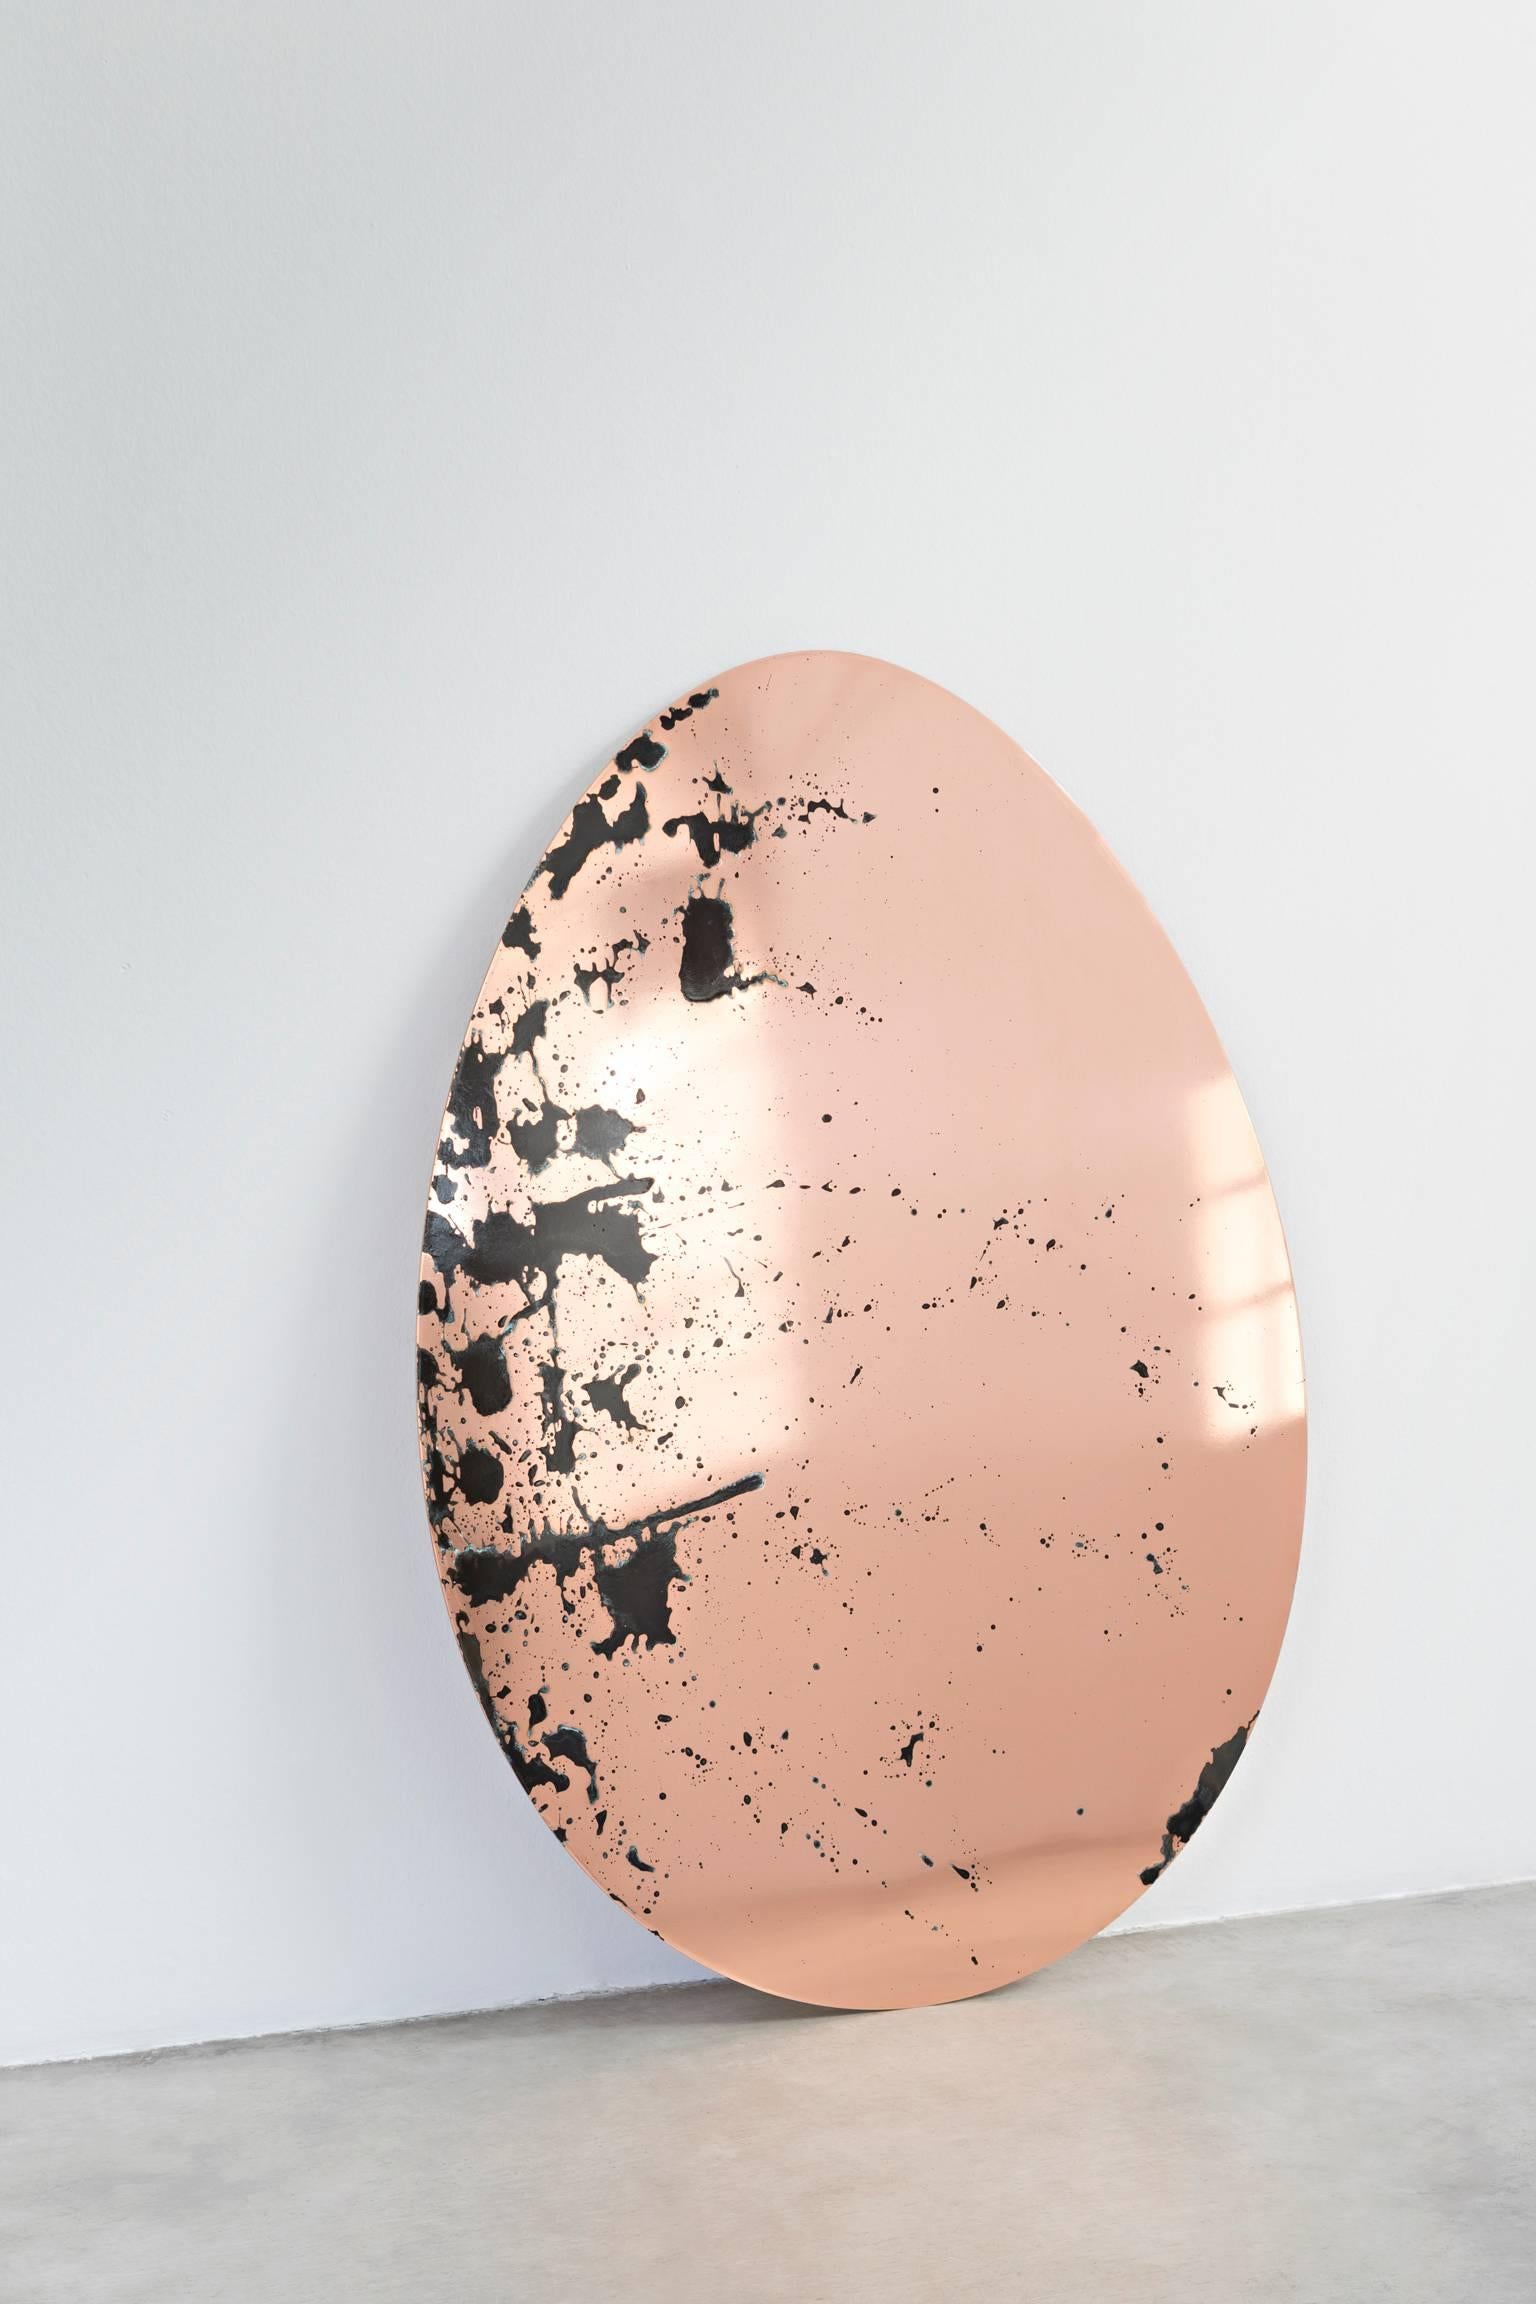 Etched Big Oval Mirrors, Model SFG 12-L, Limited Edition of 5 For Sale